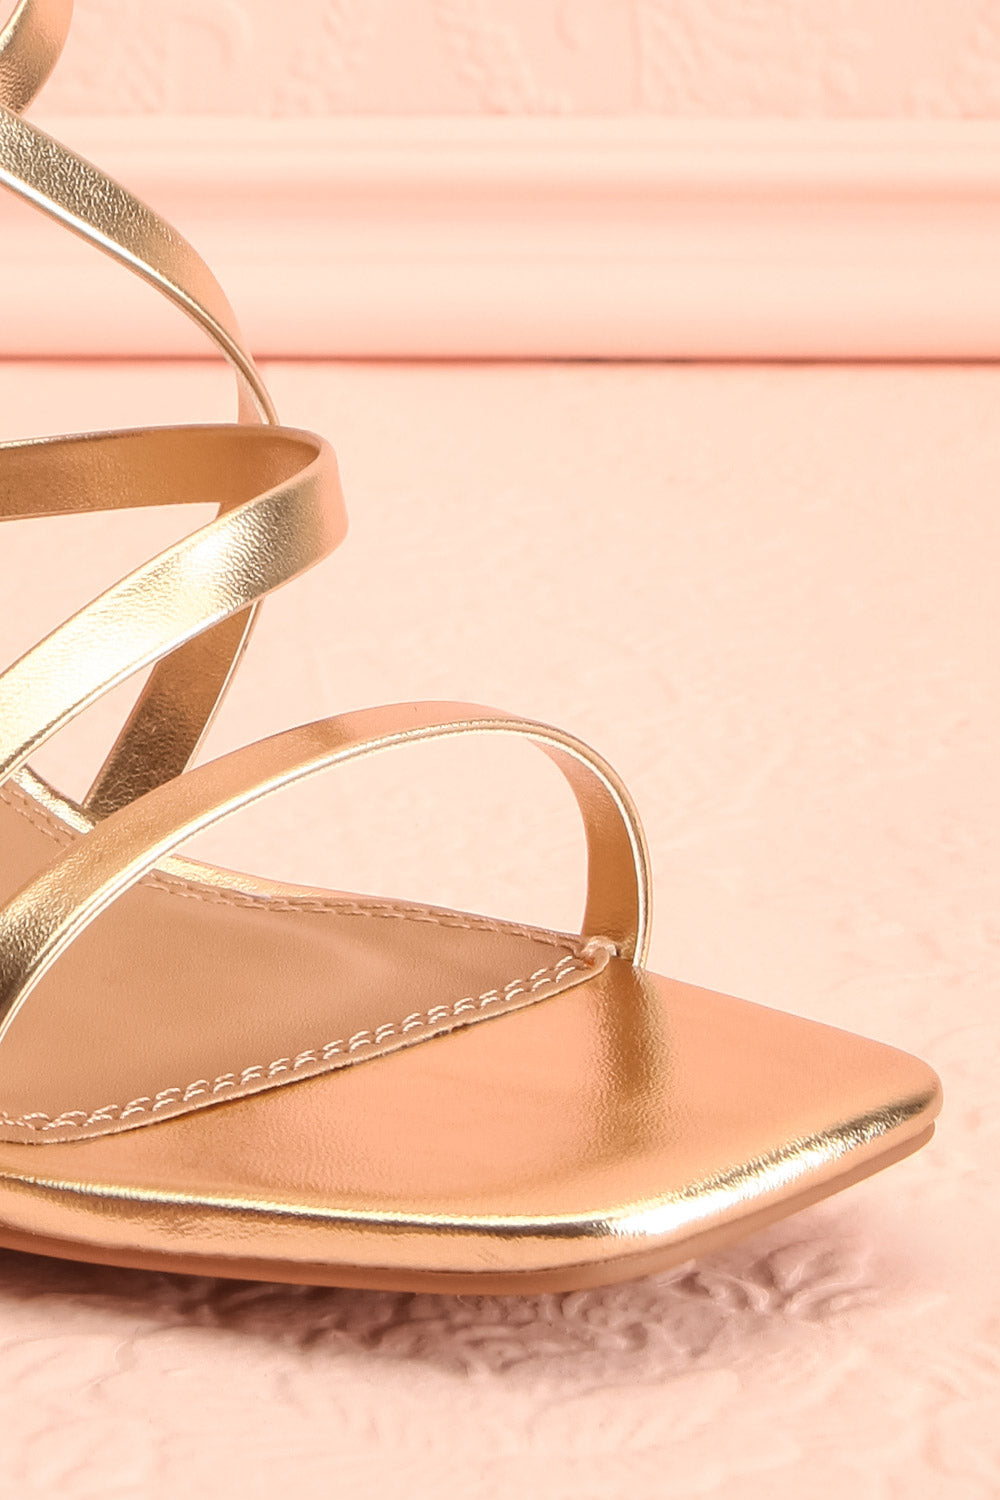 Mouvemente Gold Crossed Strap High Heel Sandals | Boutique 1861 front close-up